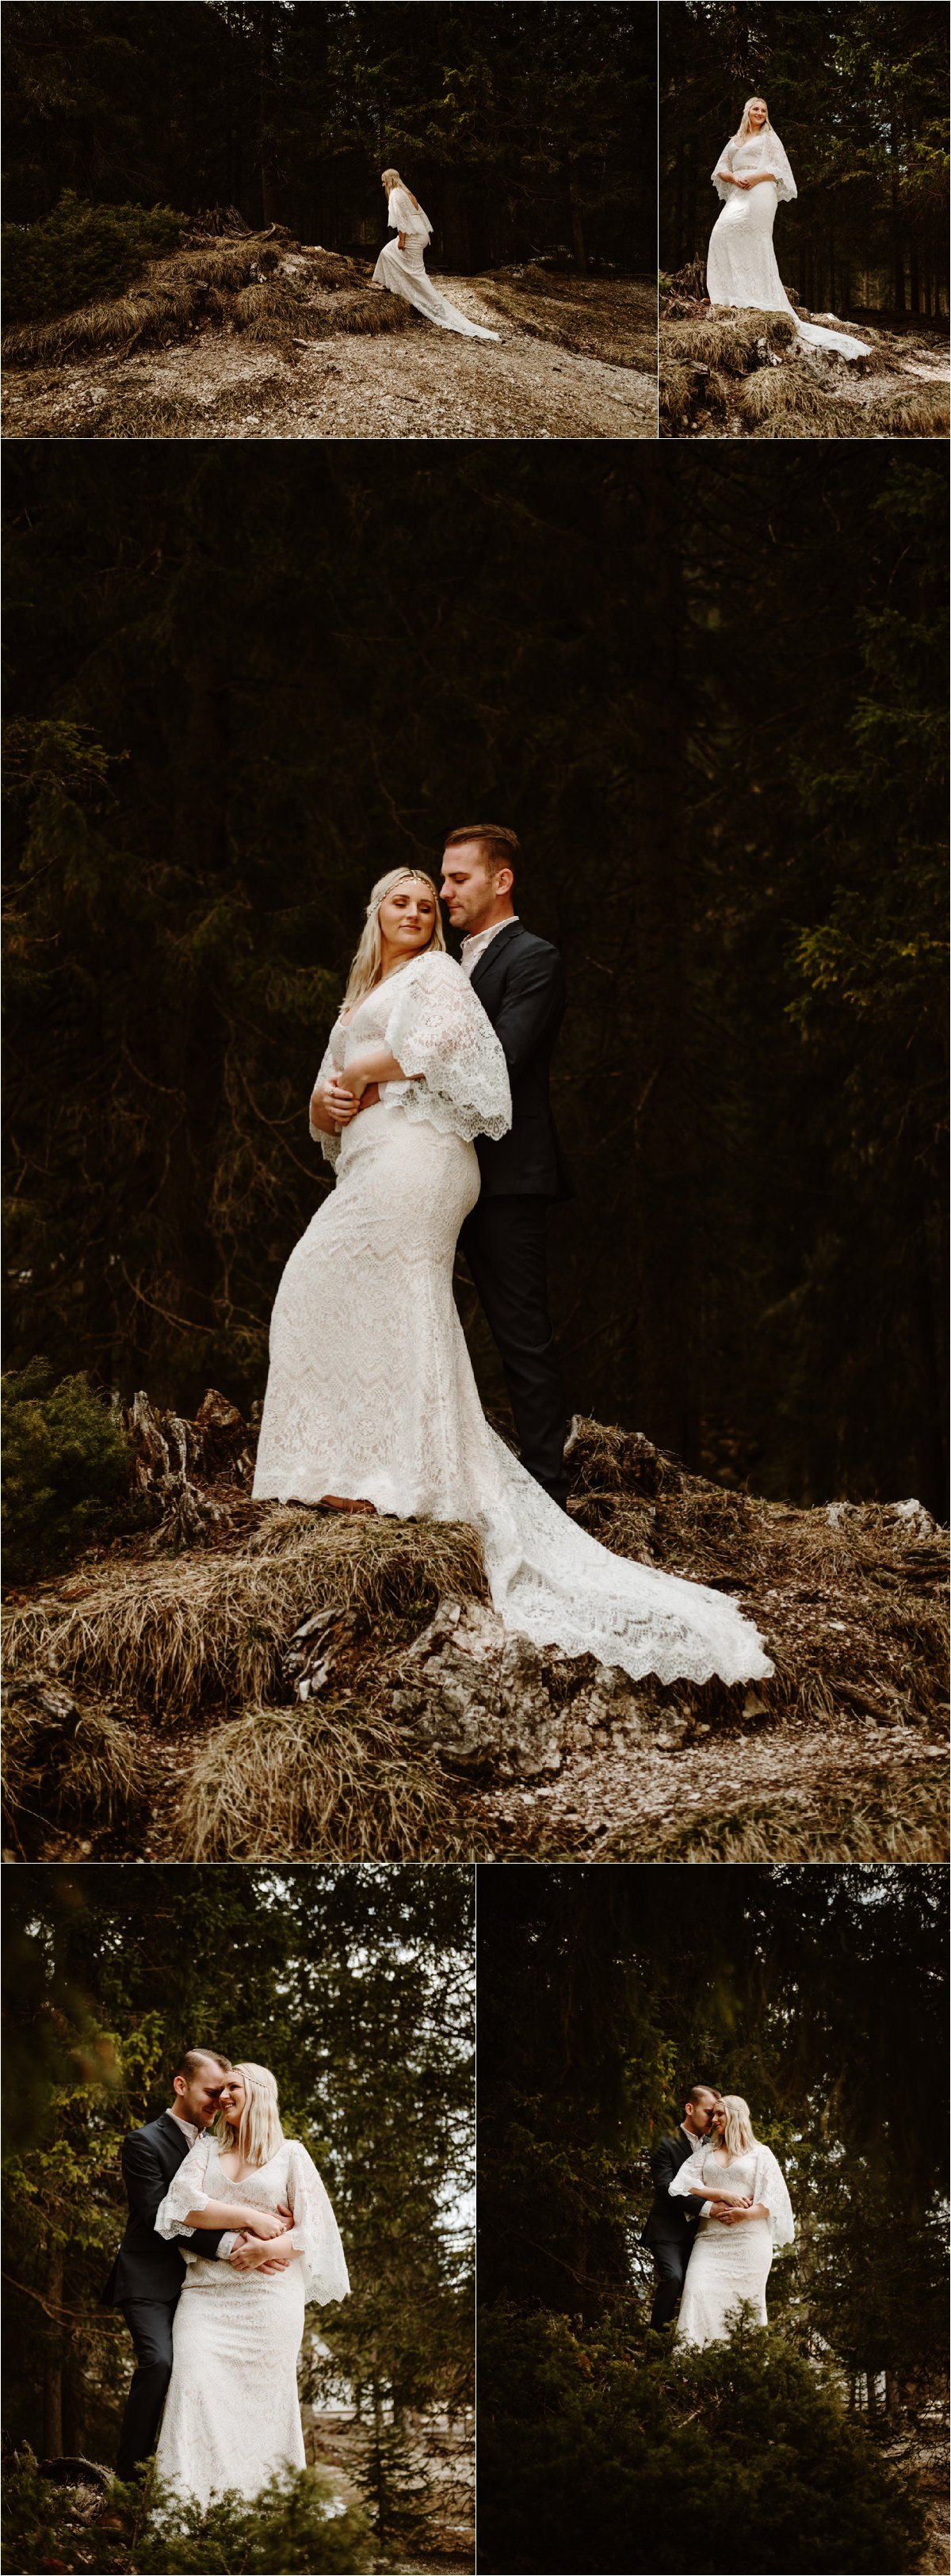 Erika looks like a Game of Thrones bride in her stunning Bohemian vintage lace wedding dress. Photos by Wild Connections Photography